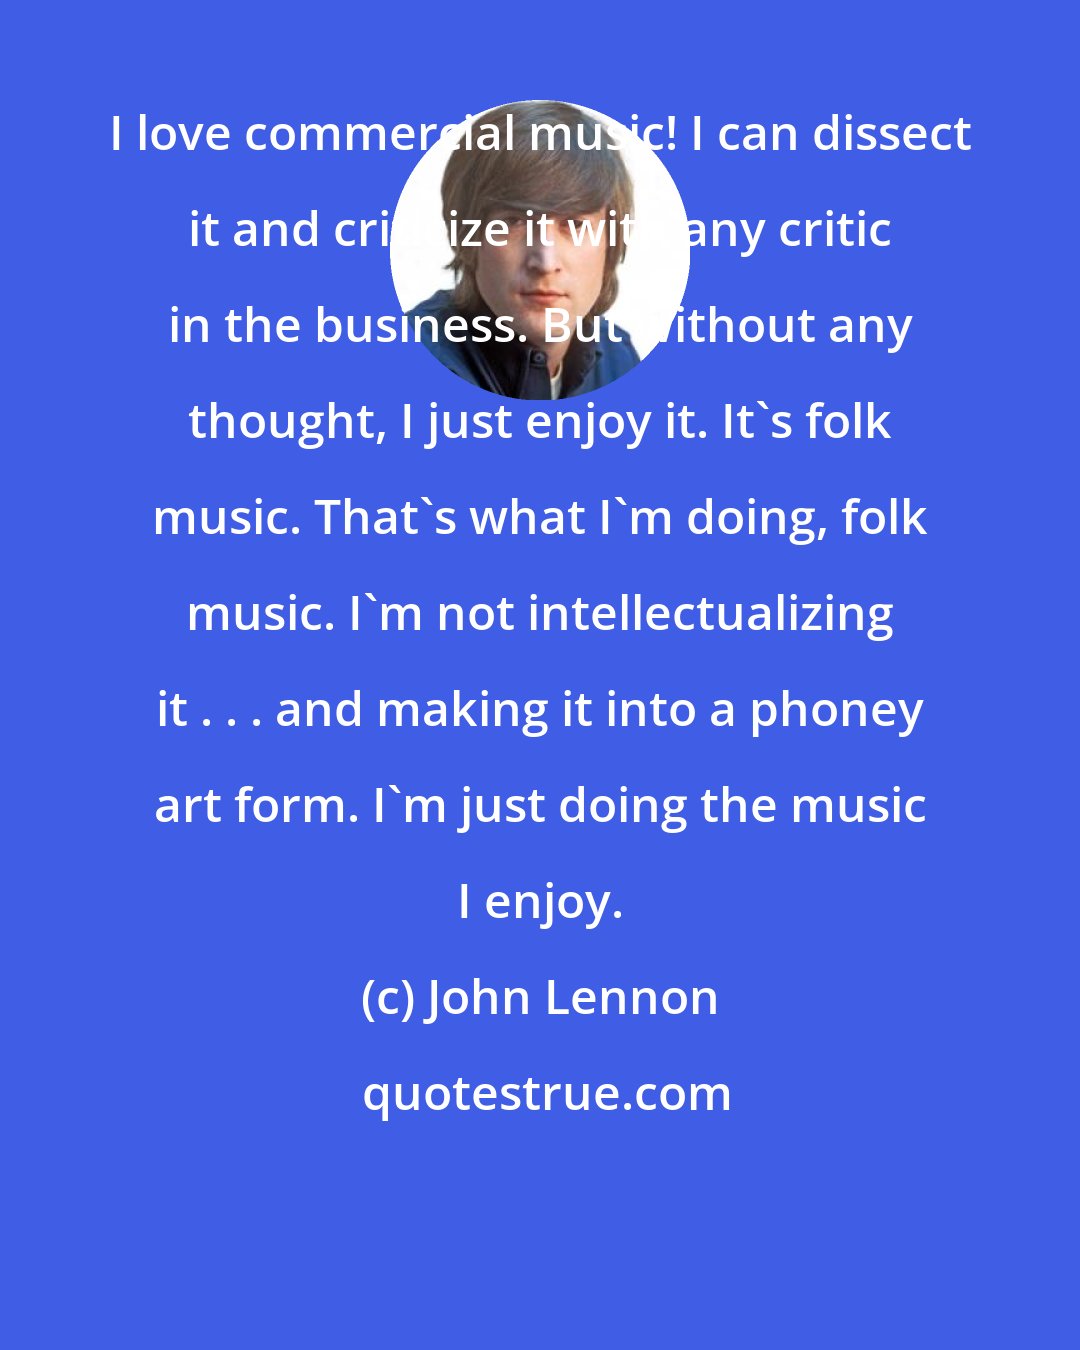 John Lennon: I love commercial music! I can dissect it and criticize it with any critic in the business. But without any thought, I just enjoy it. It's folk music. That's what I'm doing, folk music. I'm not intellectualizing it . . . and making it into a phoney art form. I'm just doing the music I enjoy.